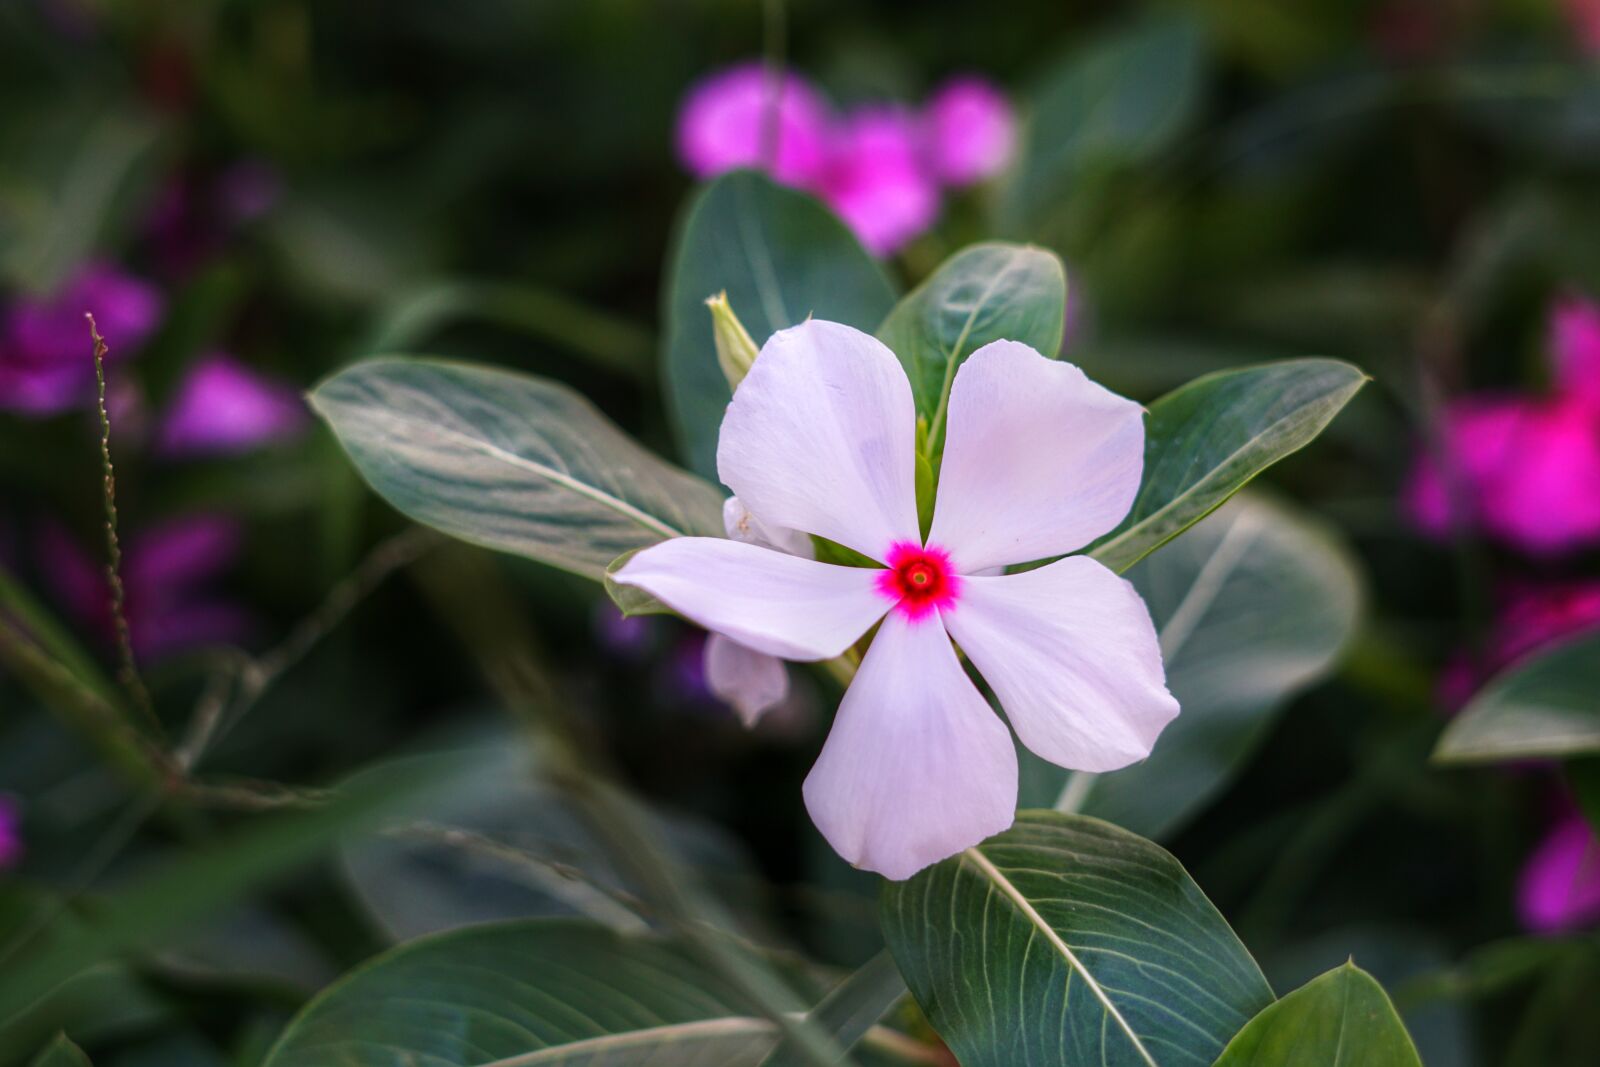 Sony a6300 sample photo. Madagascar periwinkle, billygoat weed photography